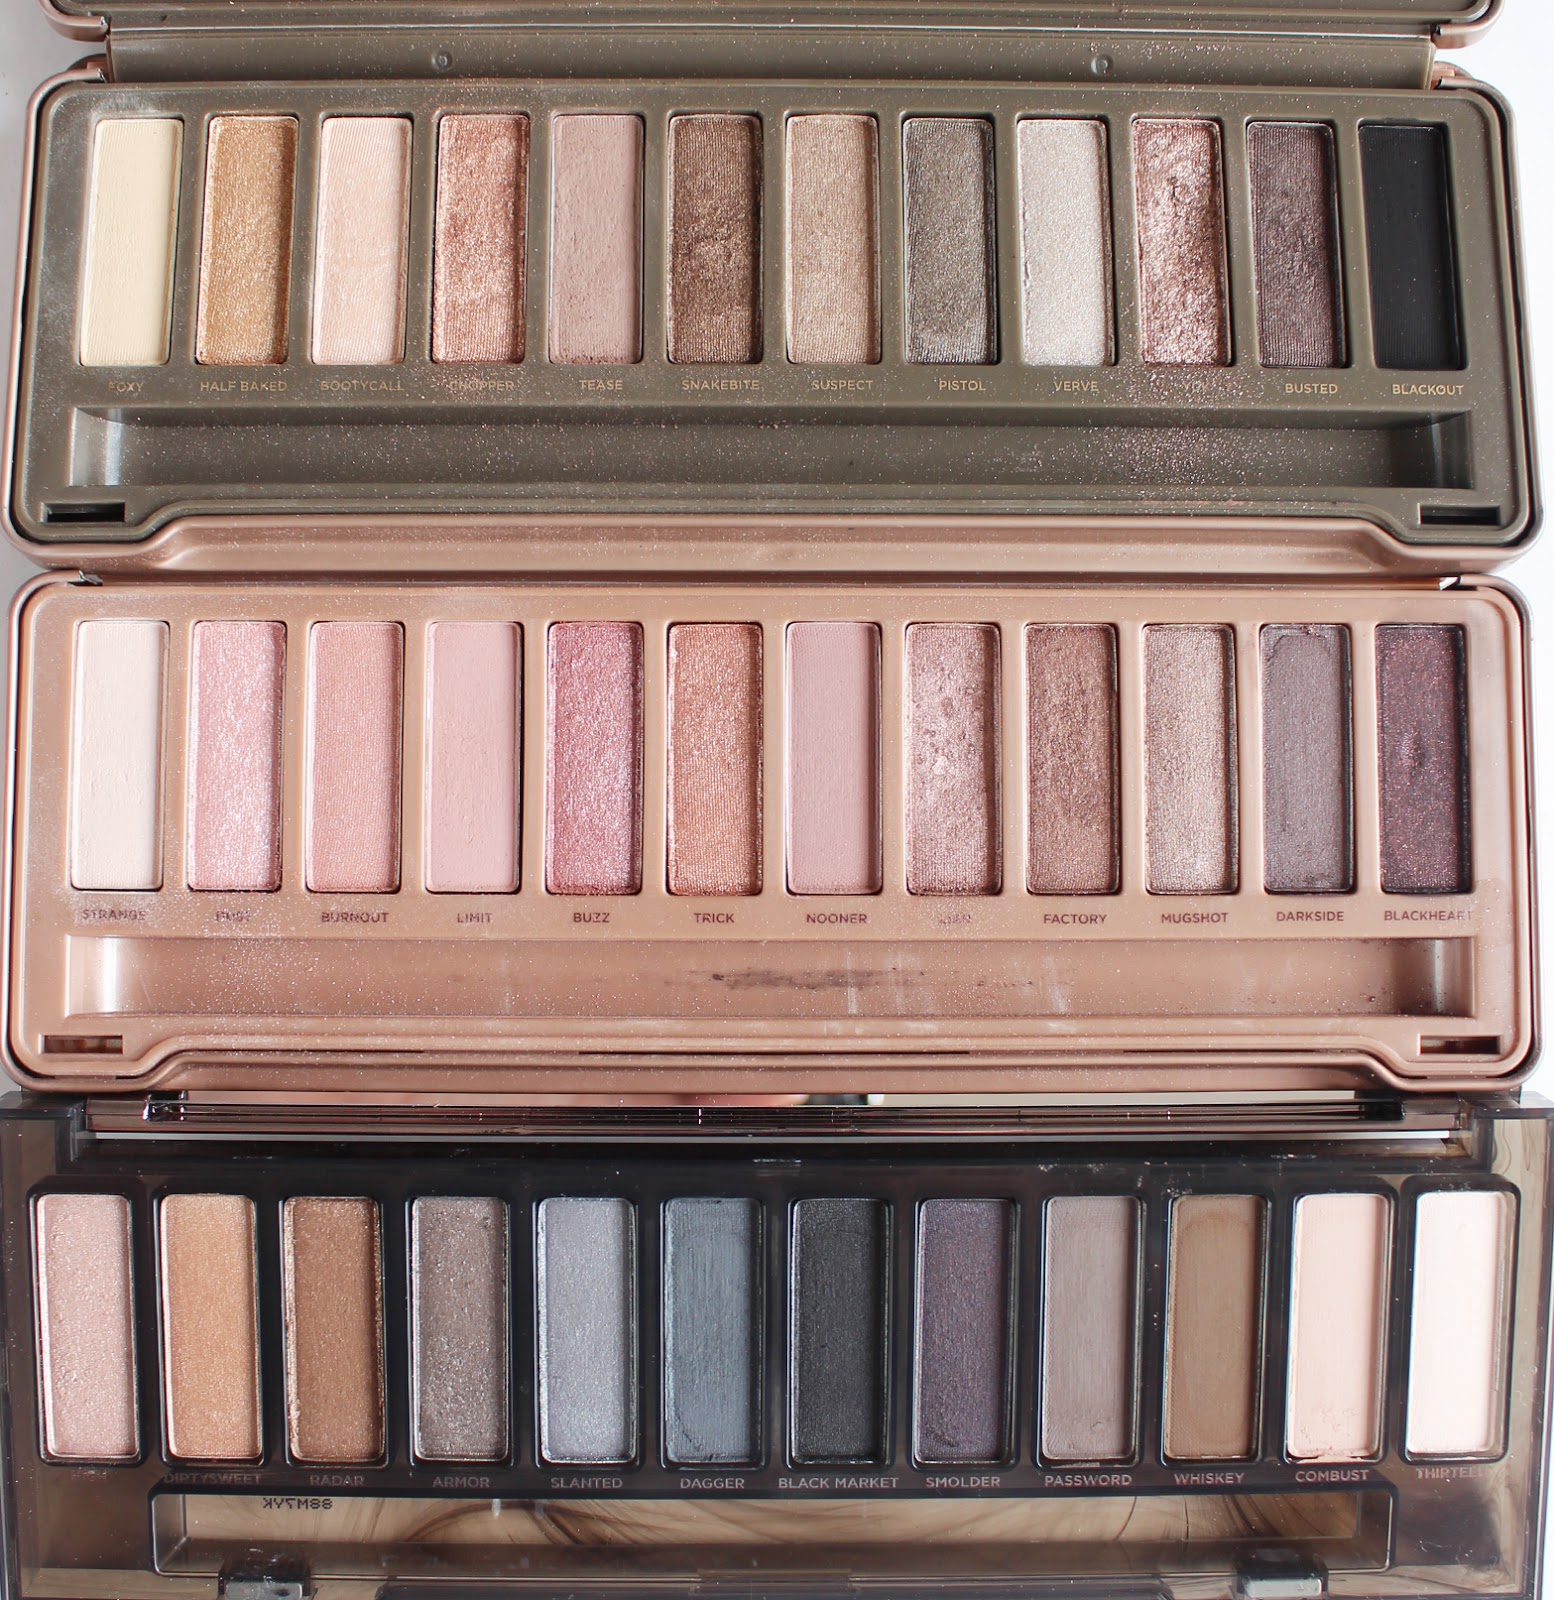 Urban Decay Naked Palette Vs Naked 2 Comparison and 